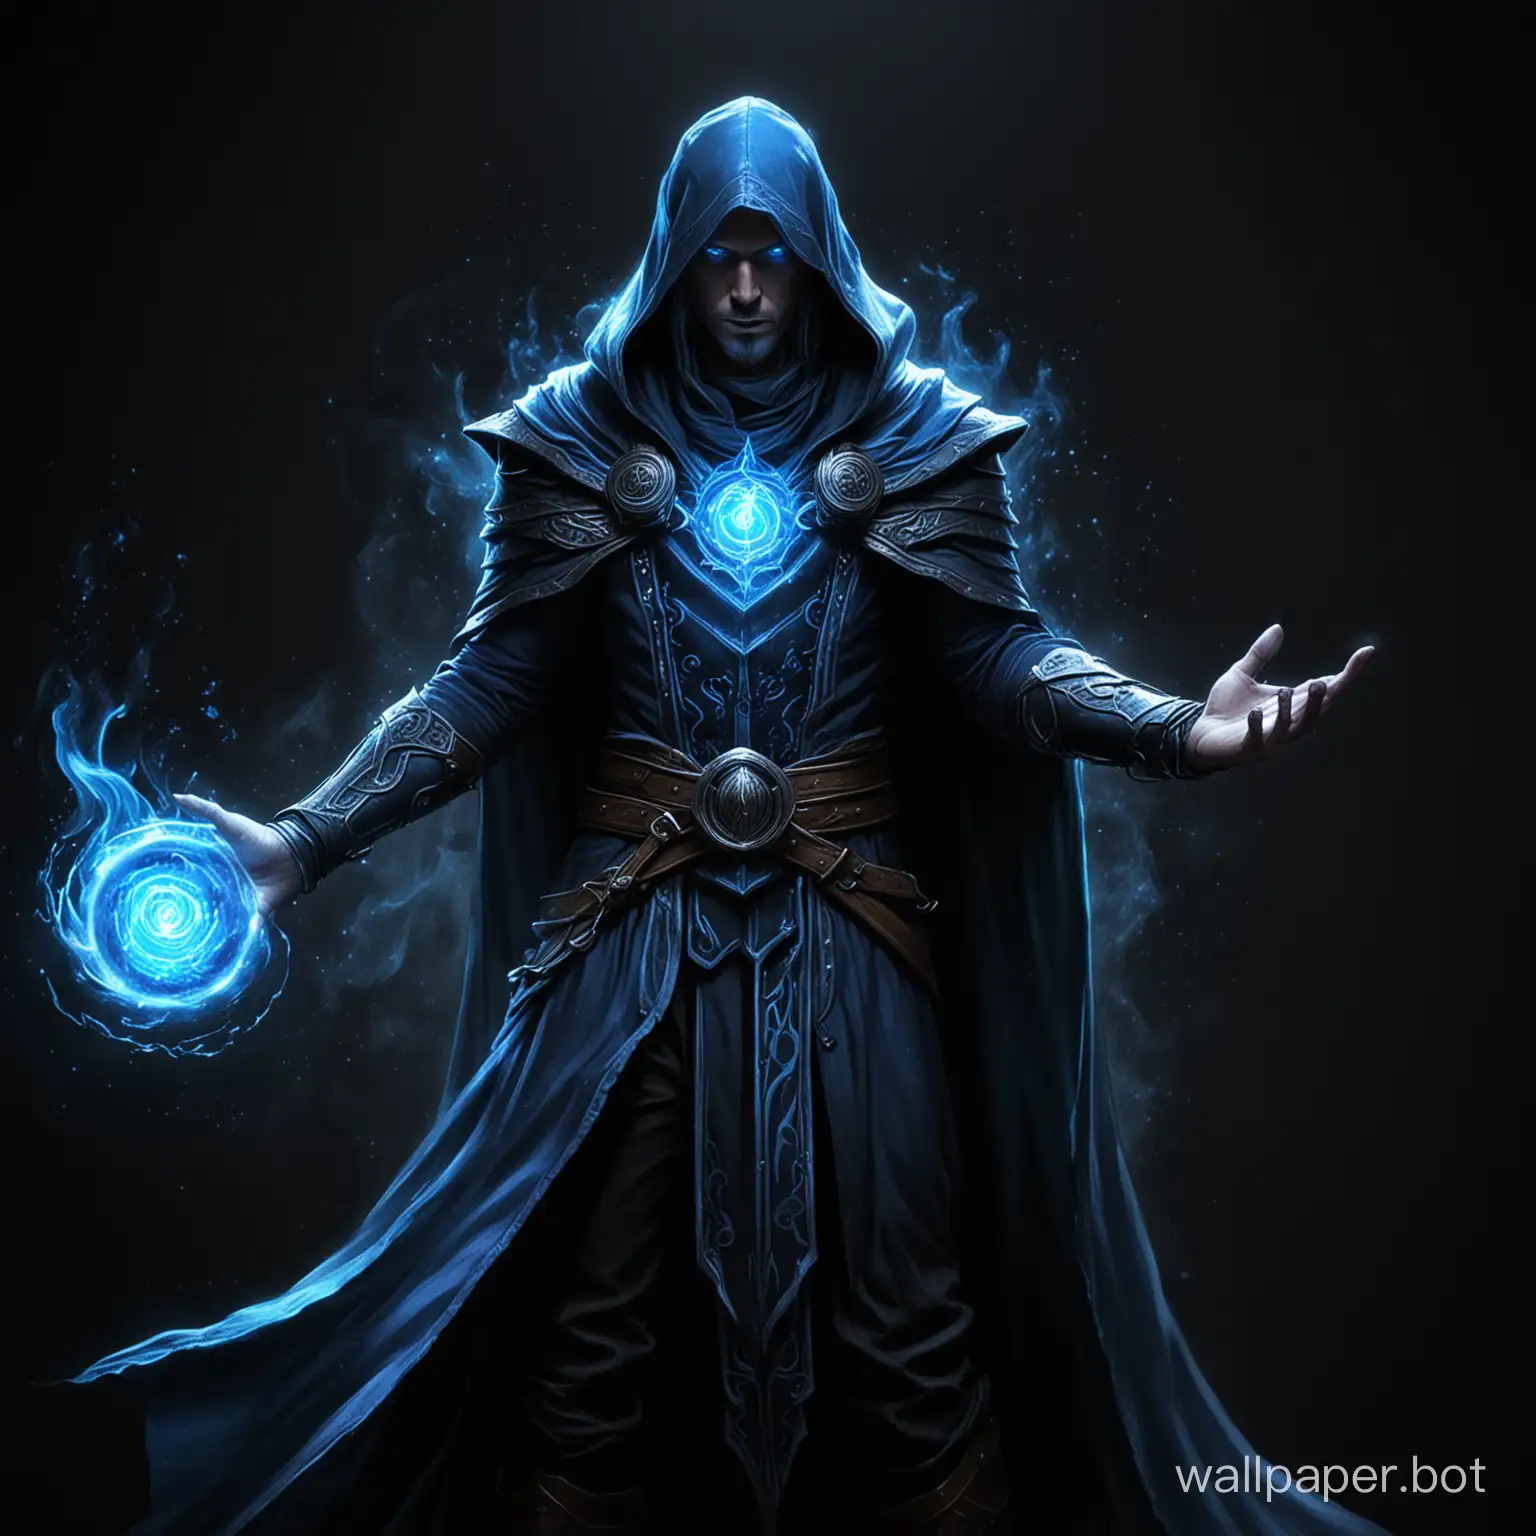 Fantasy-Mage-with-Ethereal-Blue-Aura-on-Dark-Background